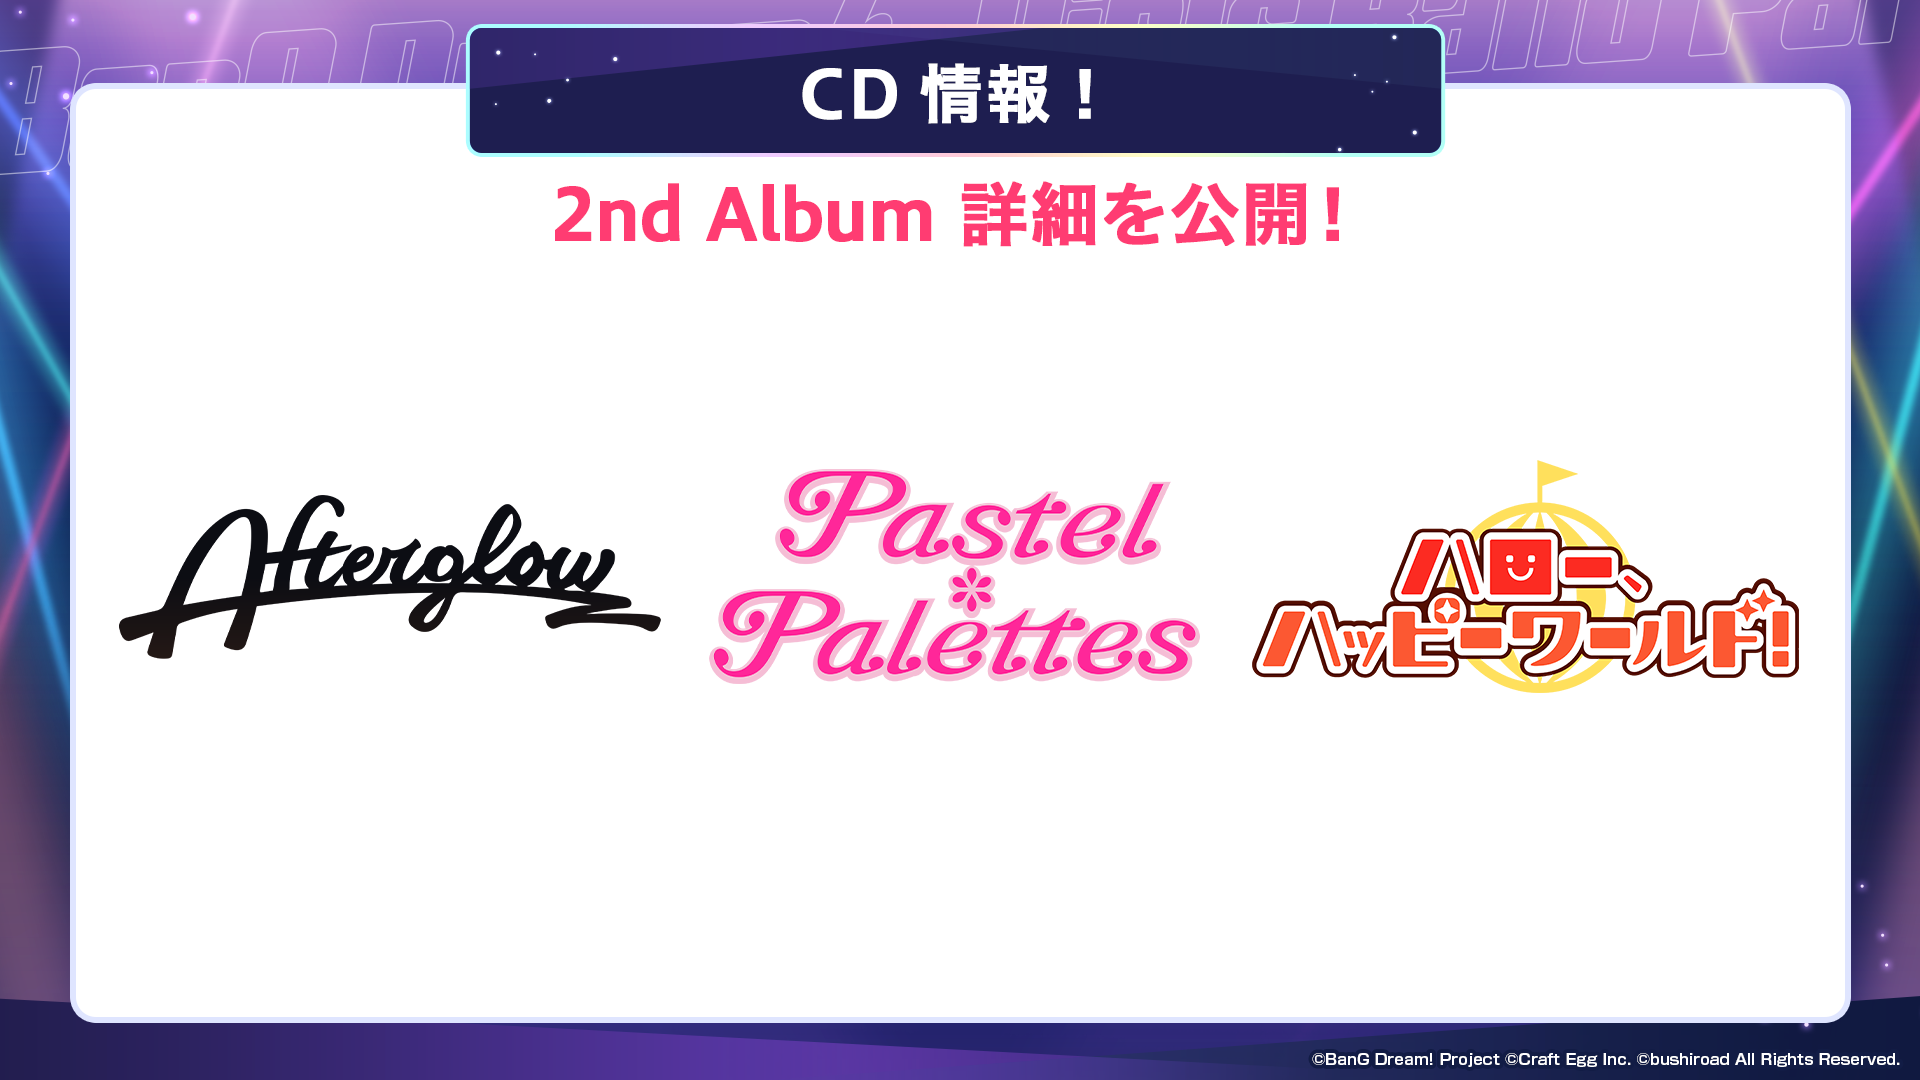 Afterglow、Pastel＊Palettes、ハロー、ハッピーワールドAfterglow